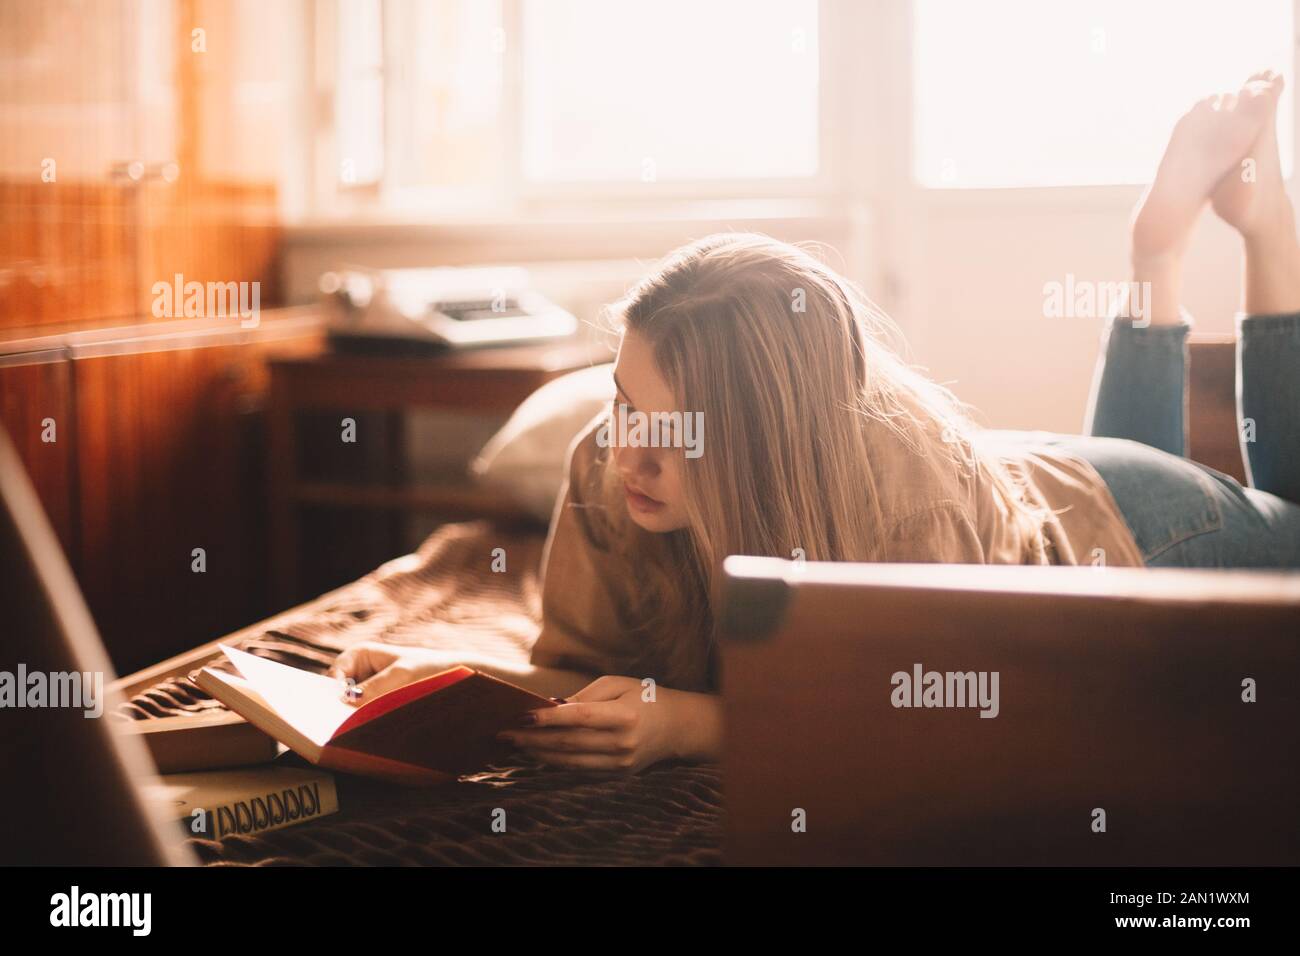 Young woman reading book while lying on bed at home Stock Photo